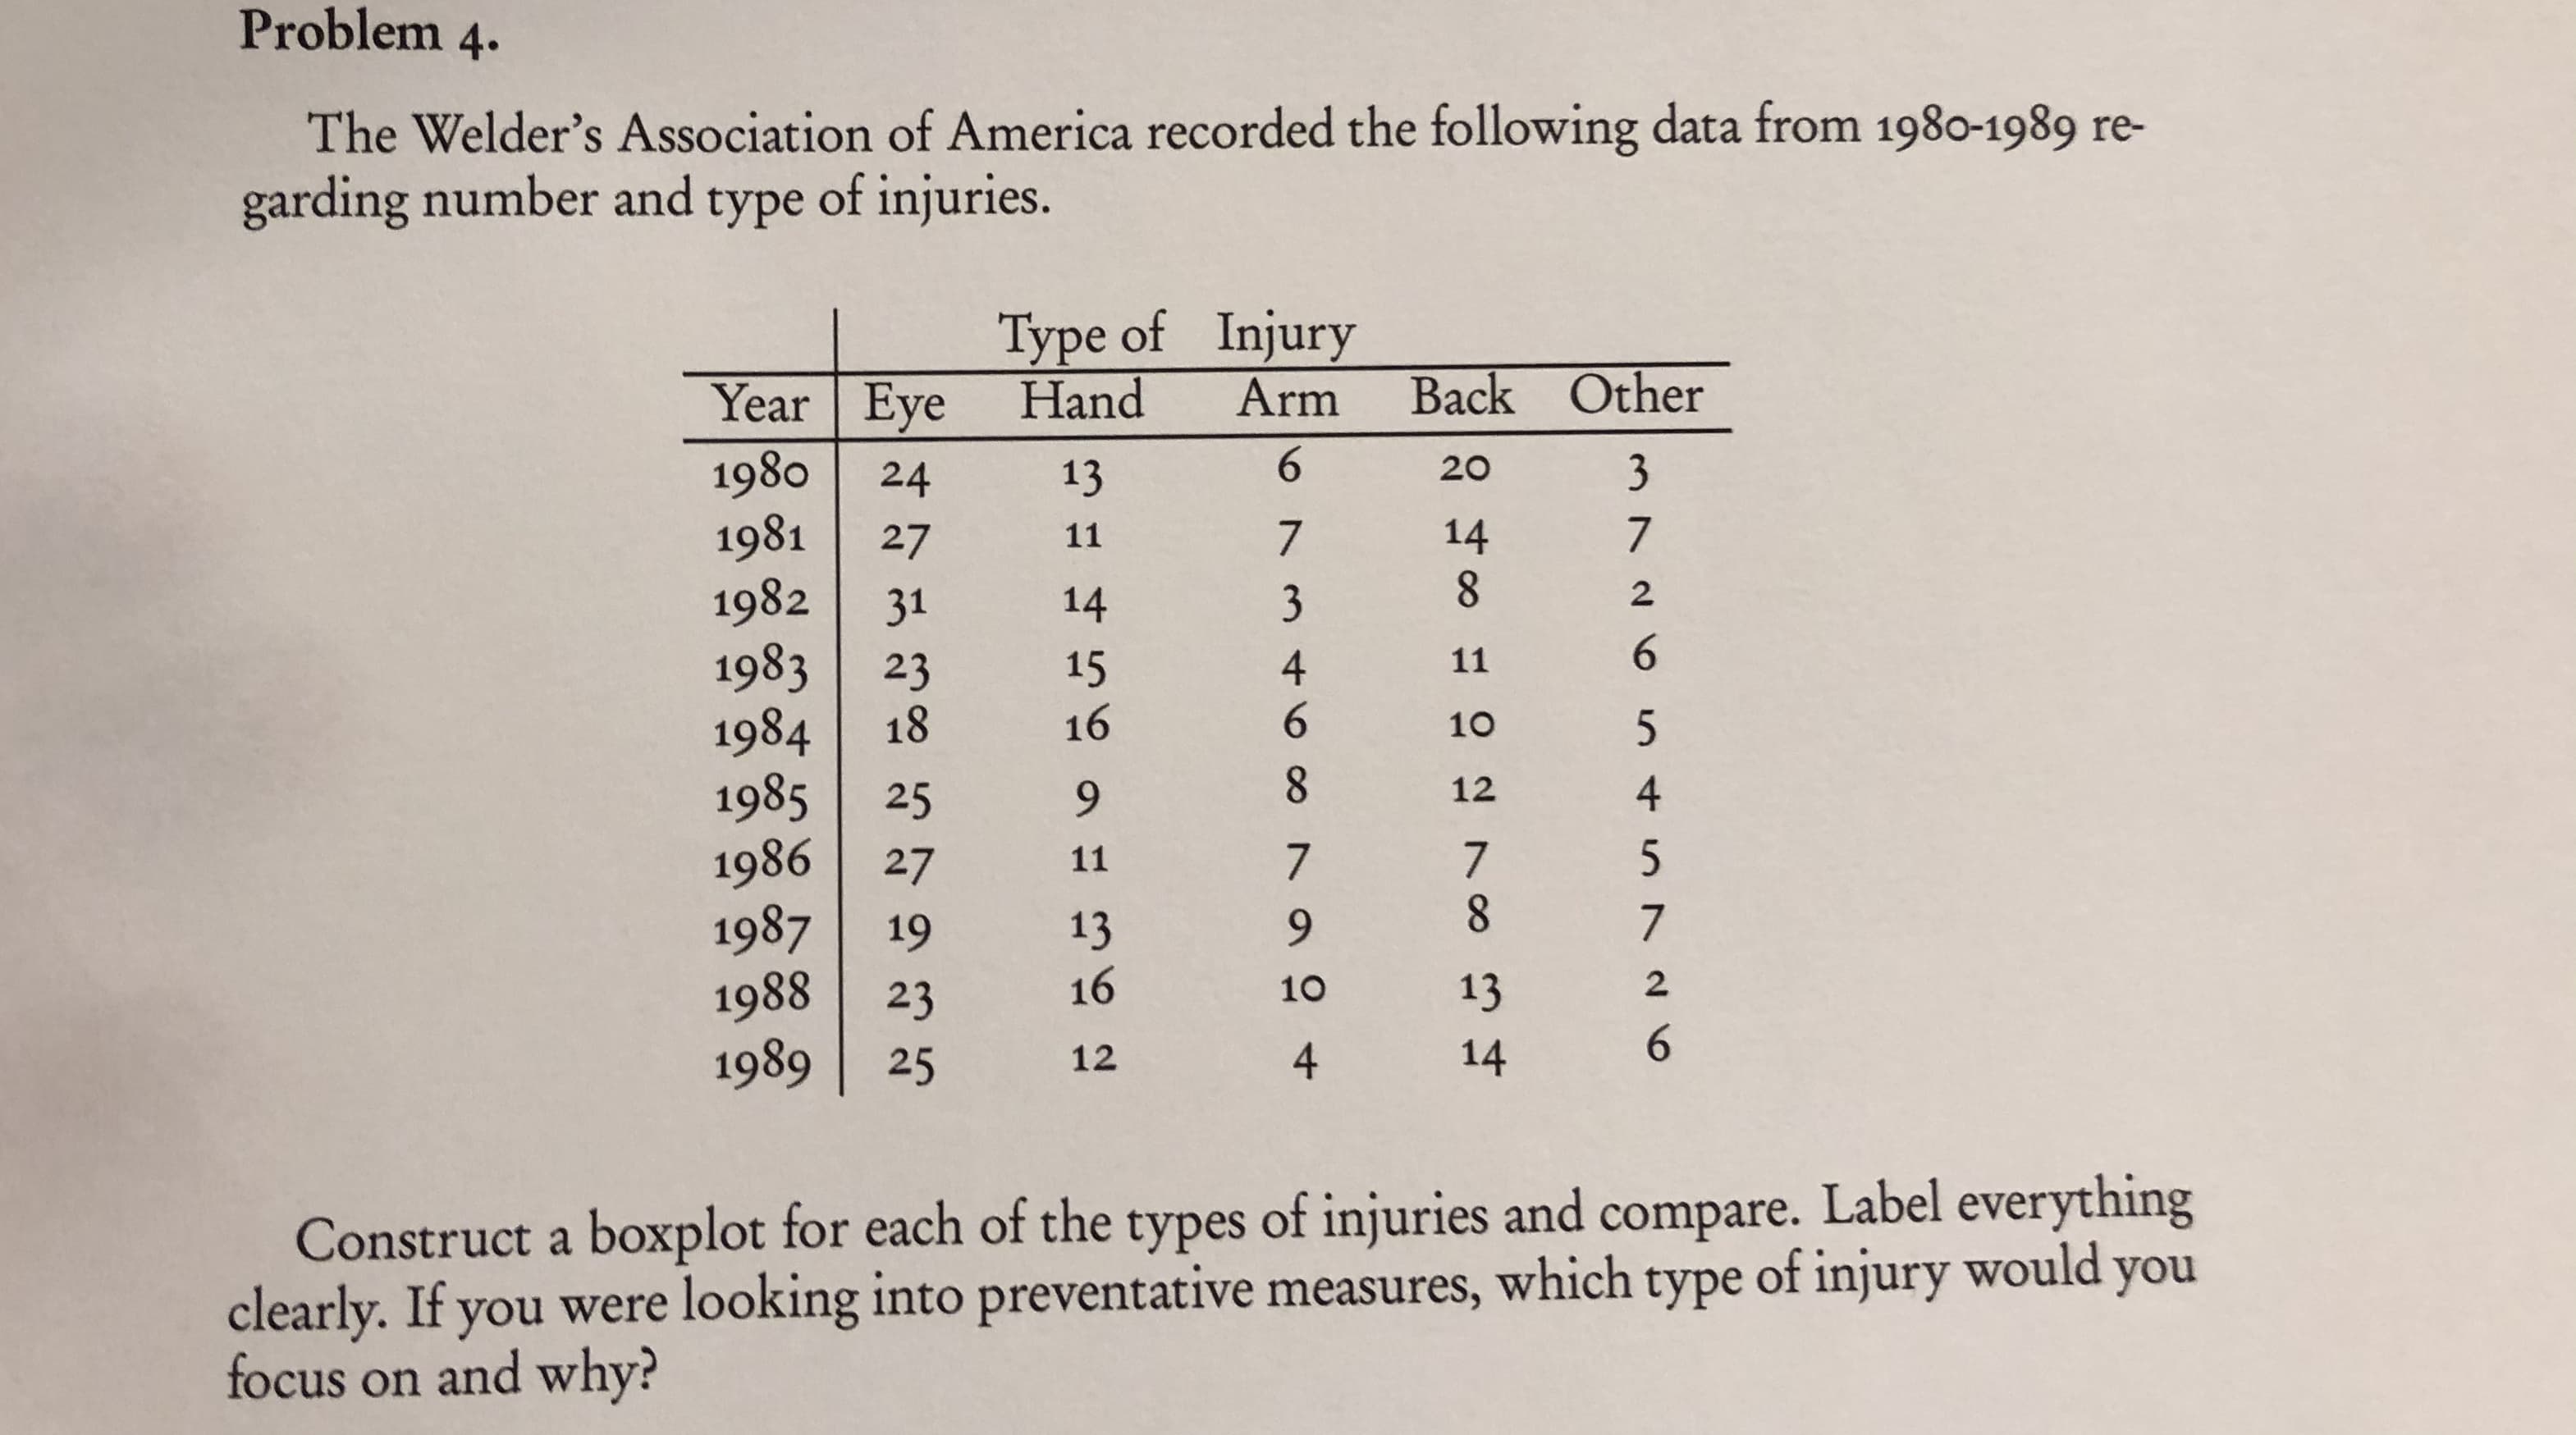 Problem 4.
The Welder's Association of America recorded the following dat a from 1980-1989 re-
garding number and type of injuries.
Type of Injury
Back Other
Year Eye
Hand
Arm
1980
1981
1982
20
13
24
14
7
27
11
2
3
14
31
6
1983
11
4
6
15
23
18
16
1984
10
8
1985
1986 27
1987
1988
1989
12
4
25
7
8
7
11
13
19
16
2
13
10
23
6
14
4
12
25
Construct a boxplot for each of the types of injuries and compare. Label everything
clearly. If you were looking into preventative measures, which type of injury would you
focus on and why?
